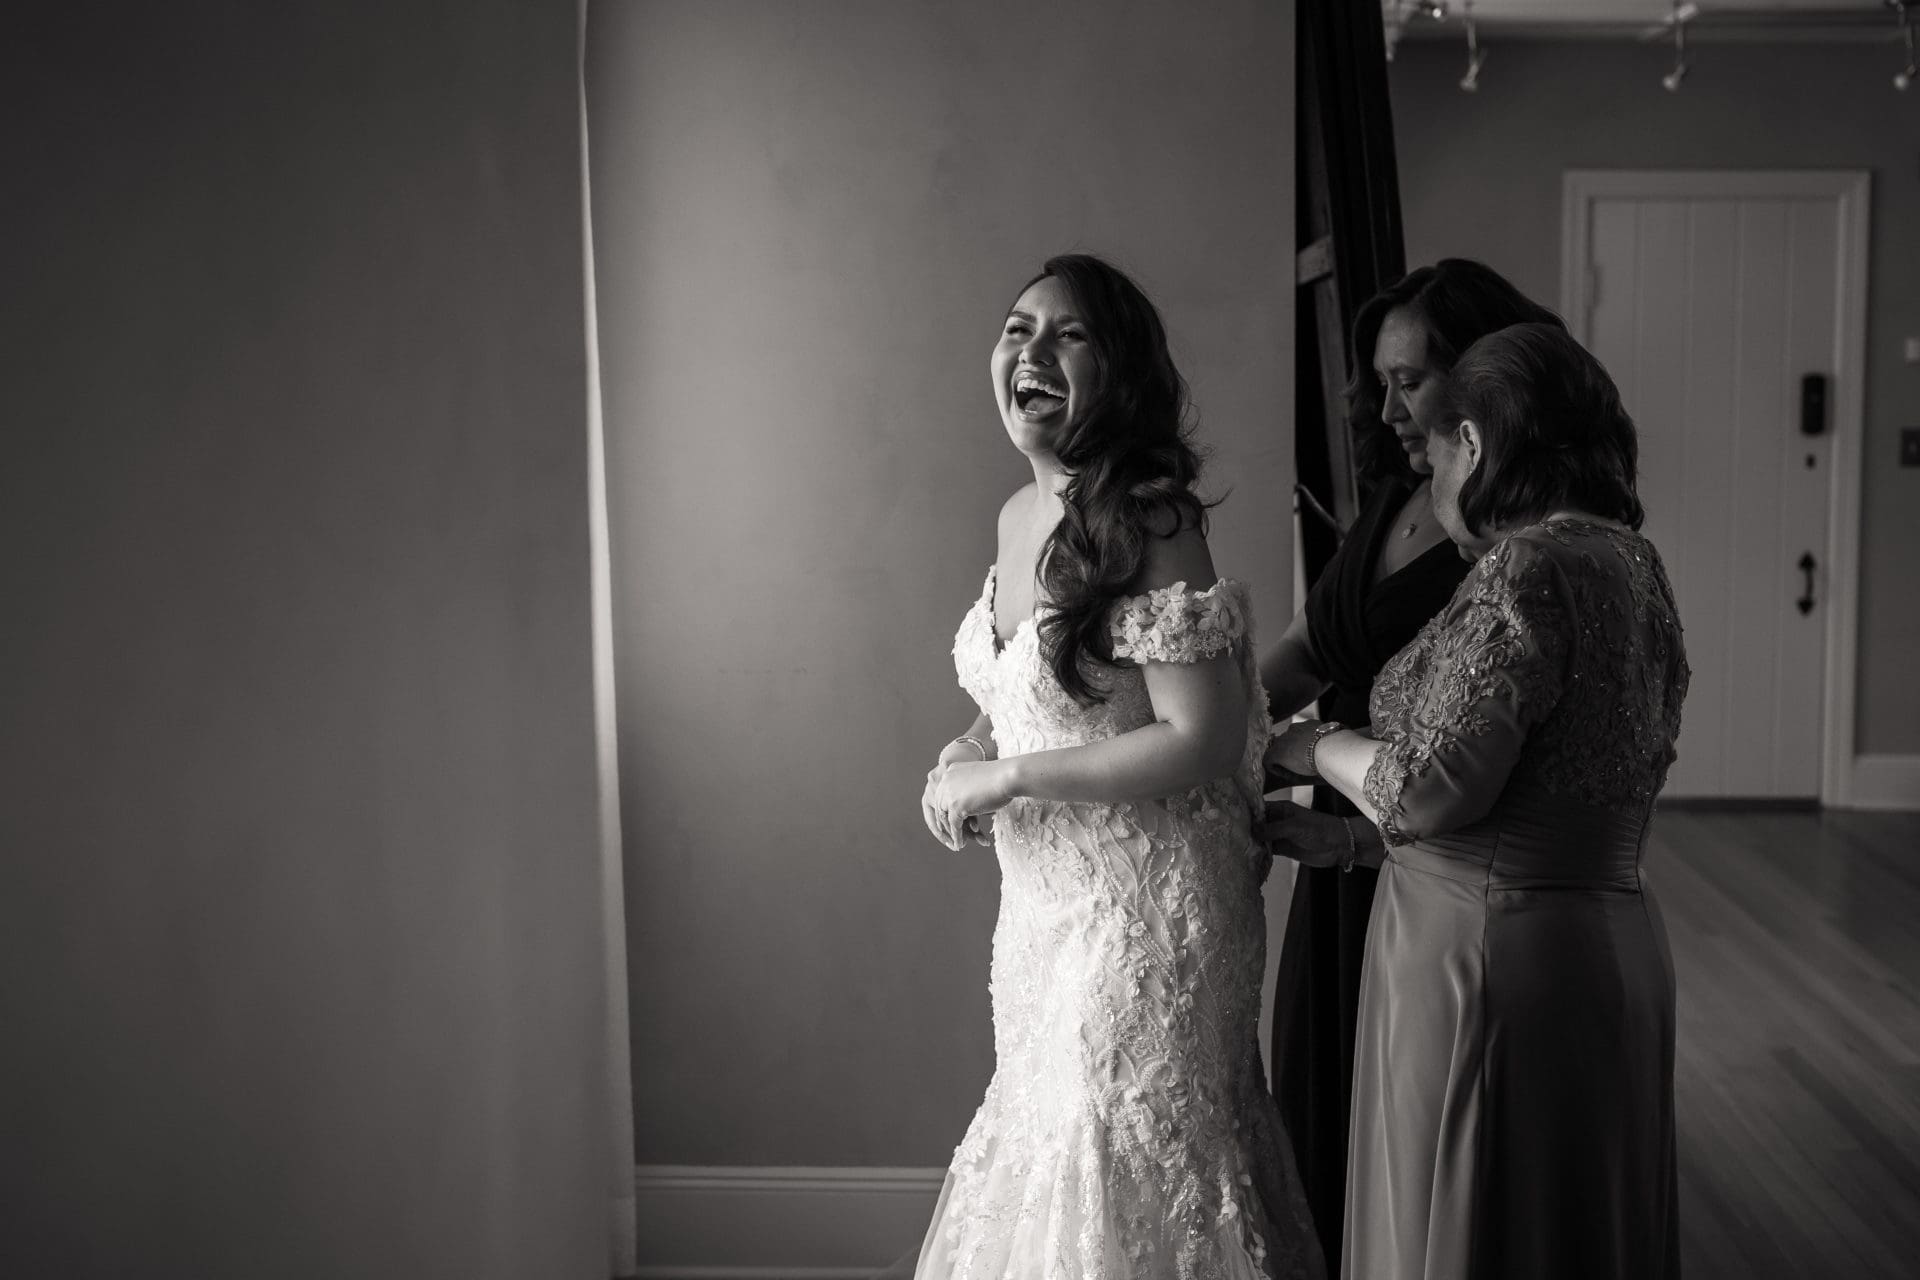 Bride getting into her wedding dress in the bridal suite at the Pleasantdale Chateau in West Orange, NJ